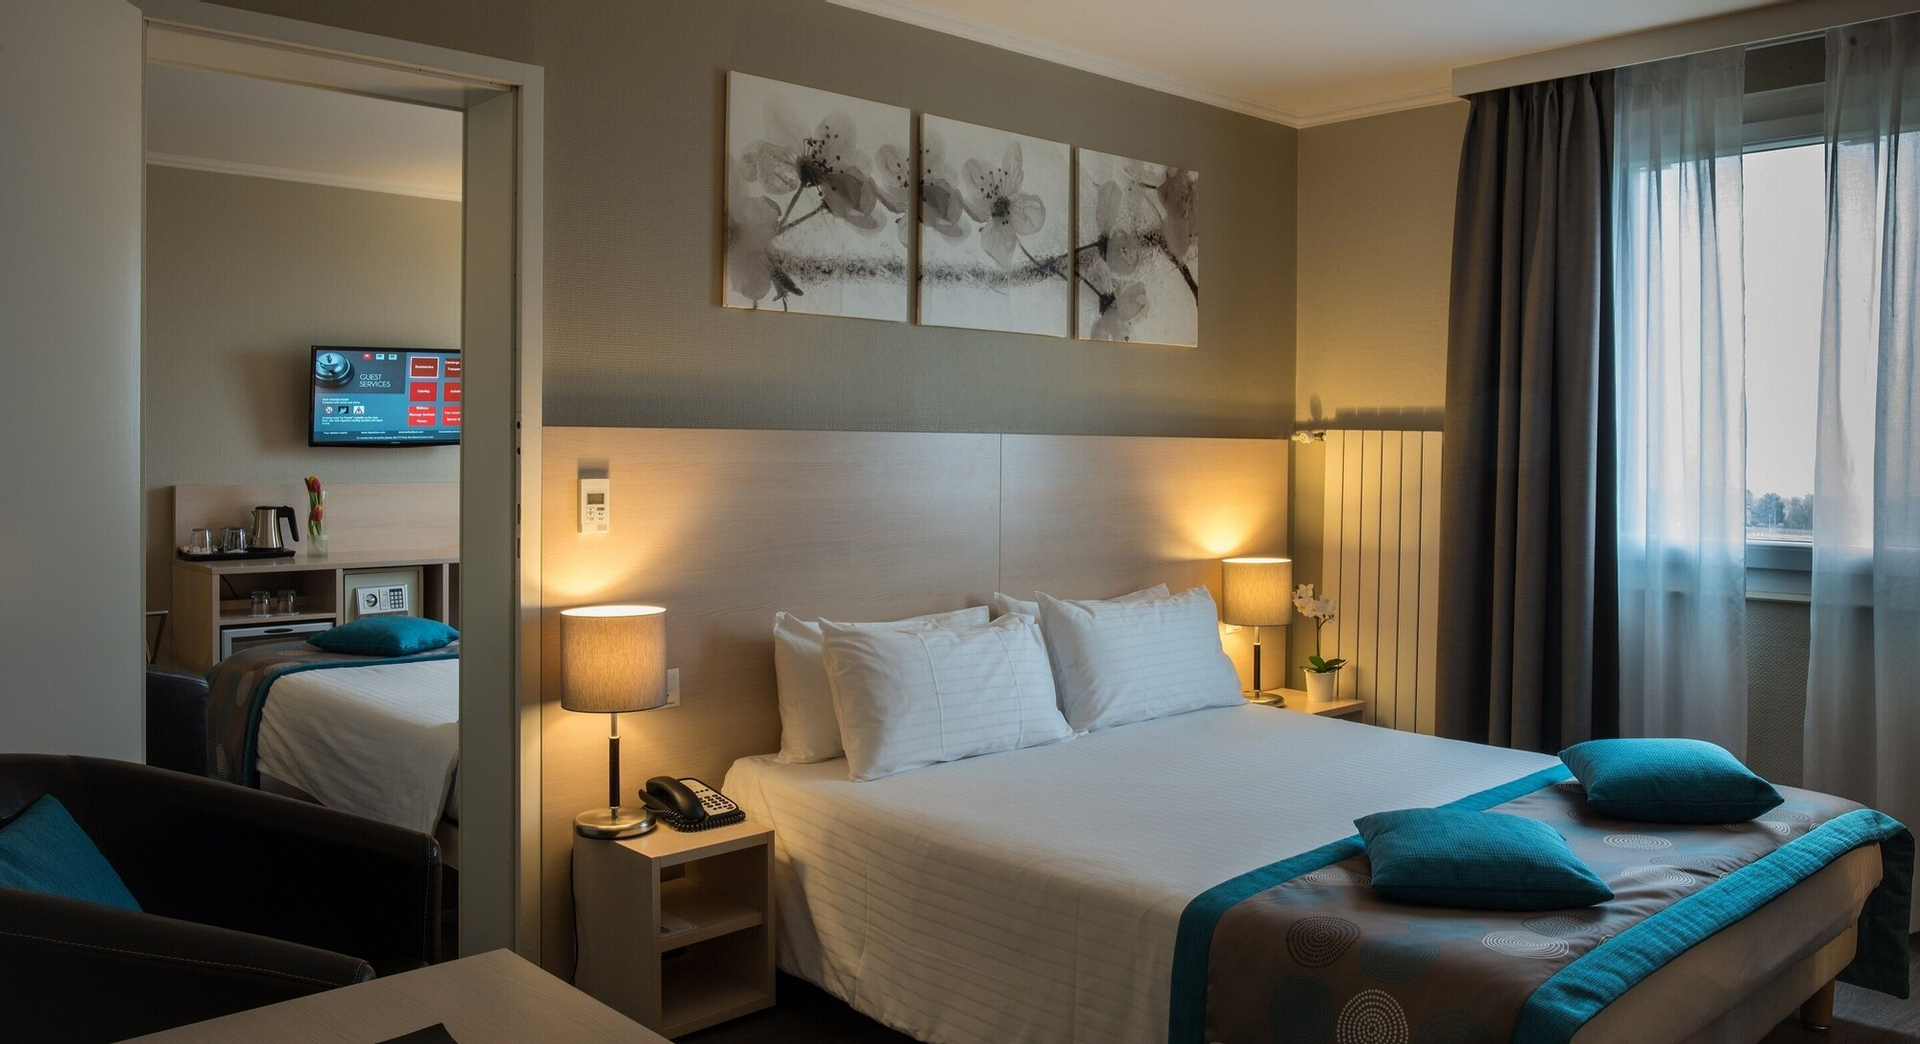 Bedroom 3, Hotel Everness, Signature Collection, Nyon